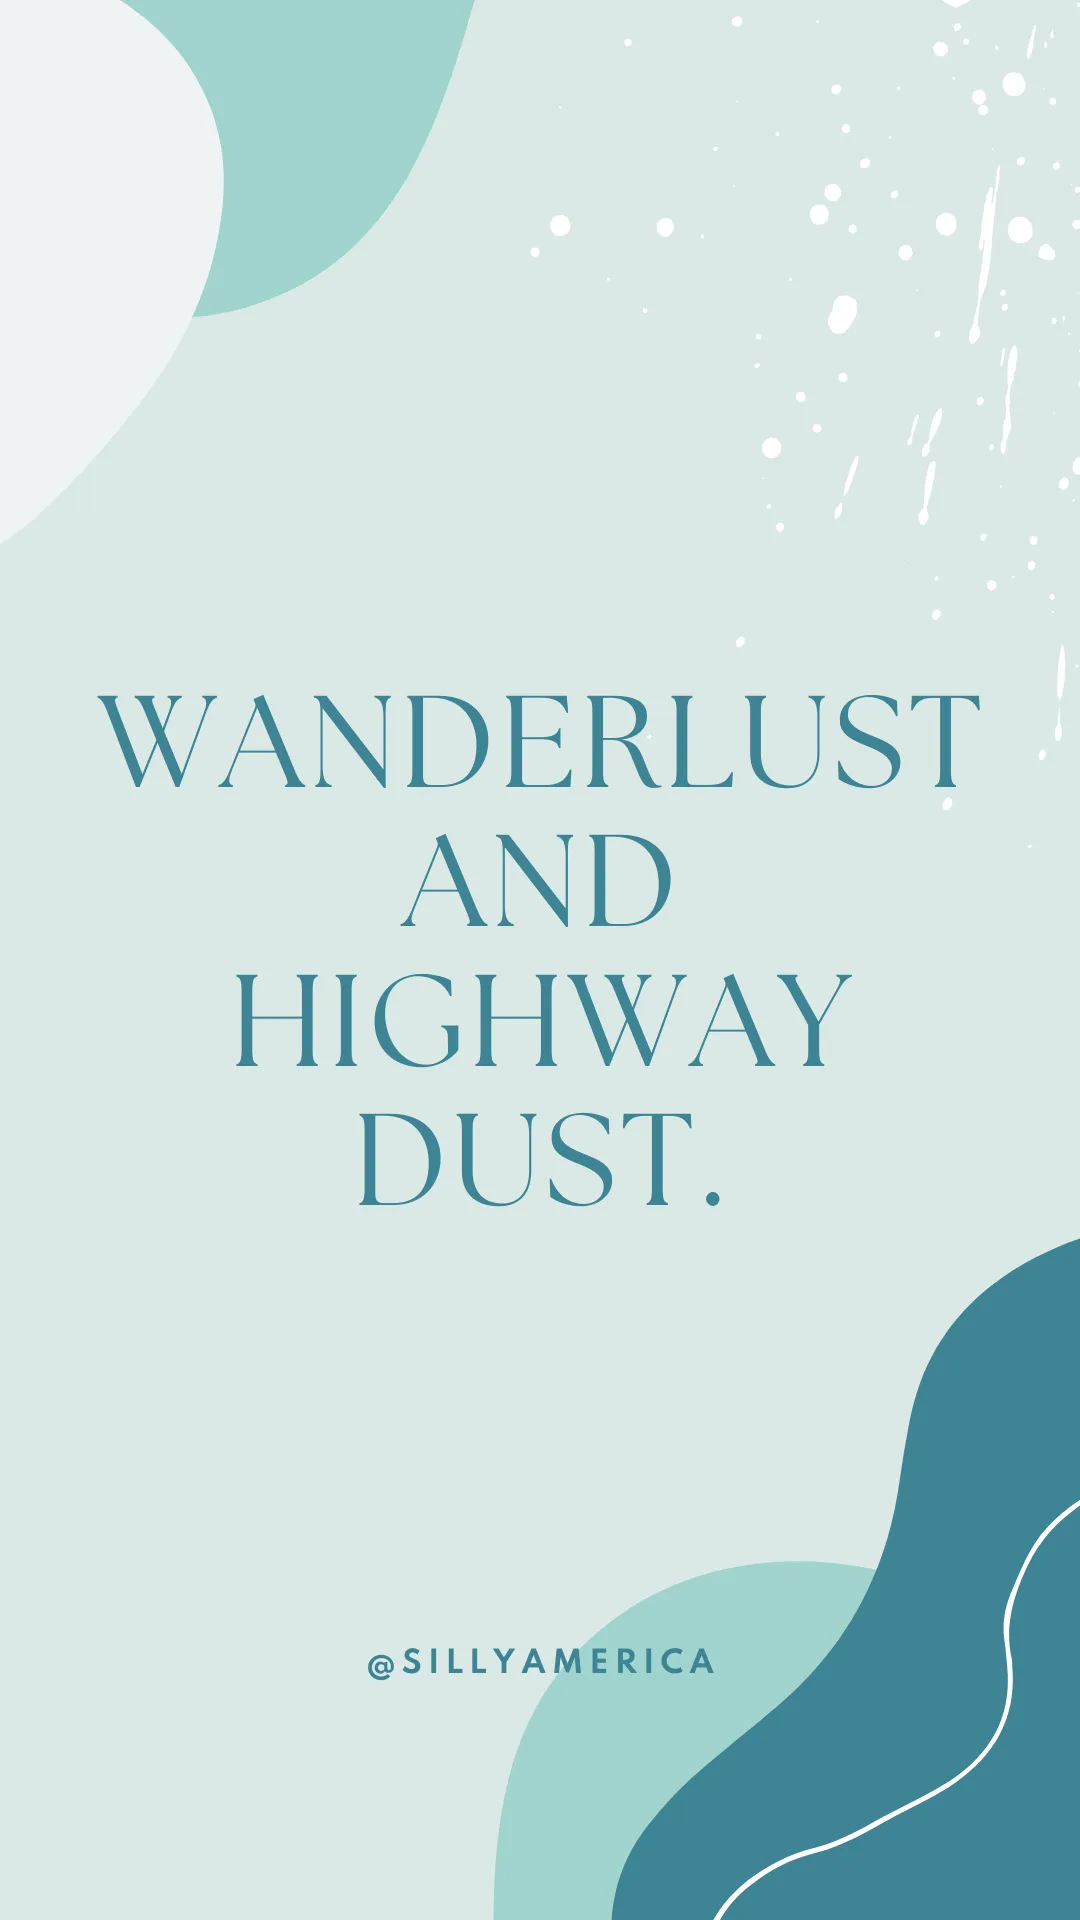 Wanderlust and highway dust. - Road Trip Captions for Instagram